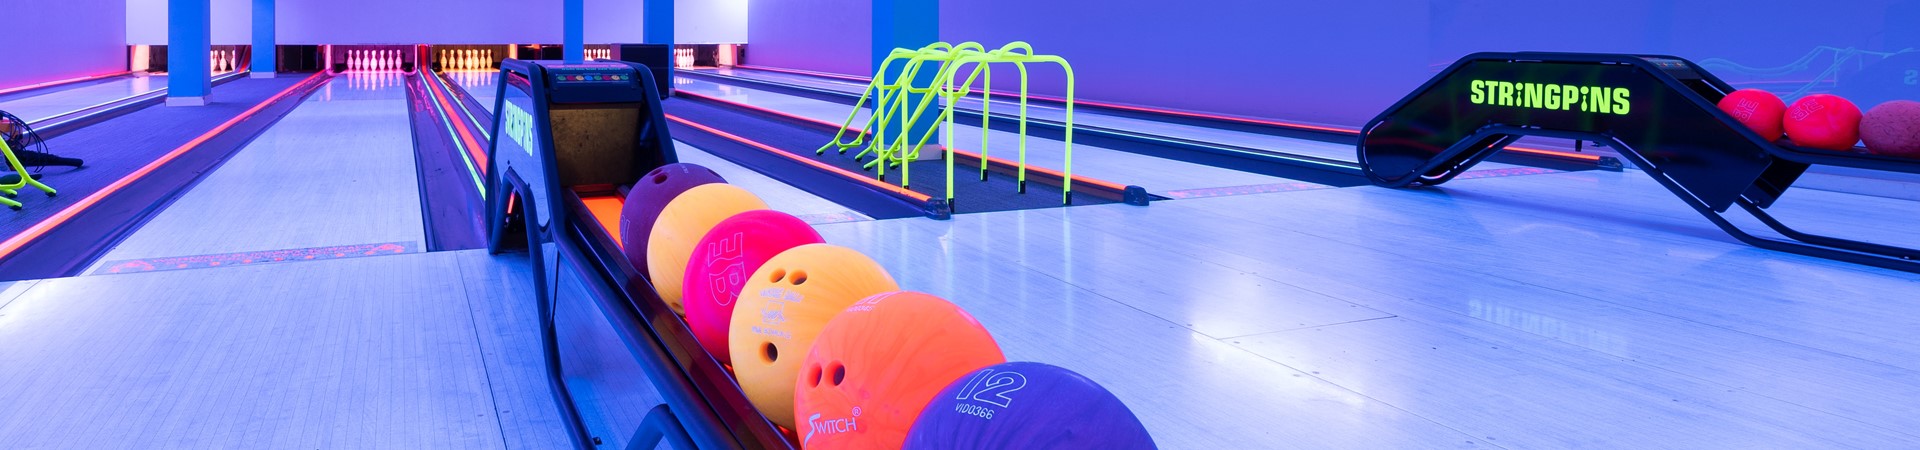 ten-pin bowling lanes in string pins at One Leisure St Ives